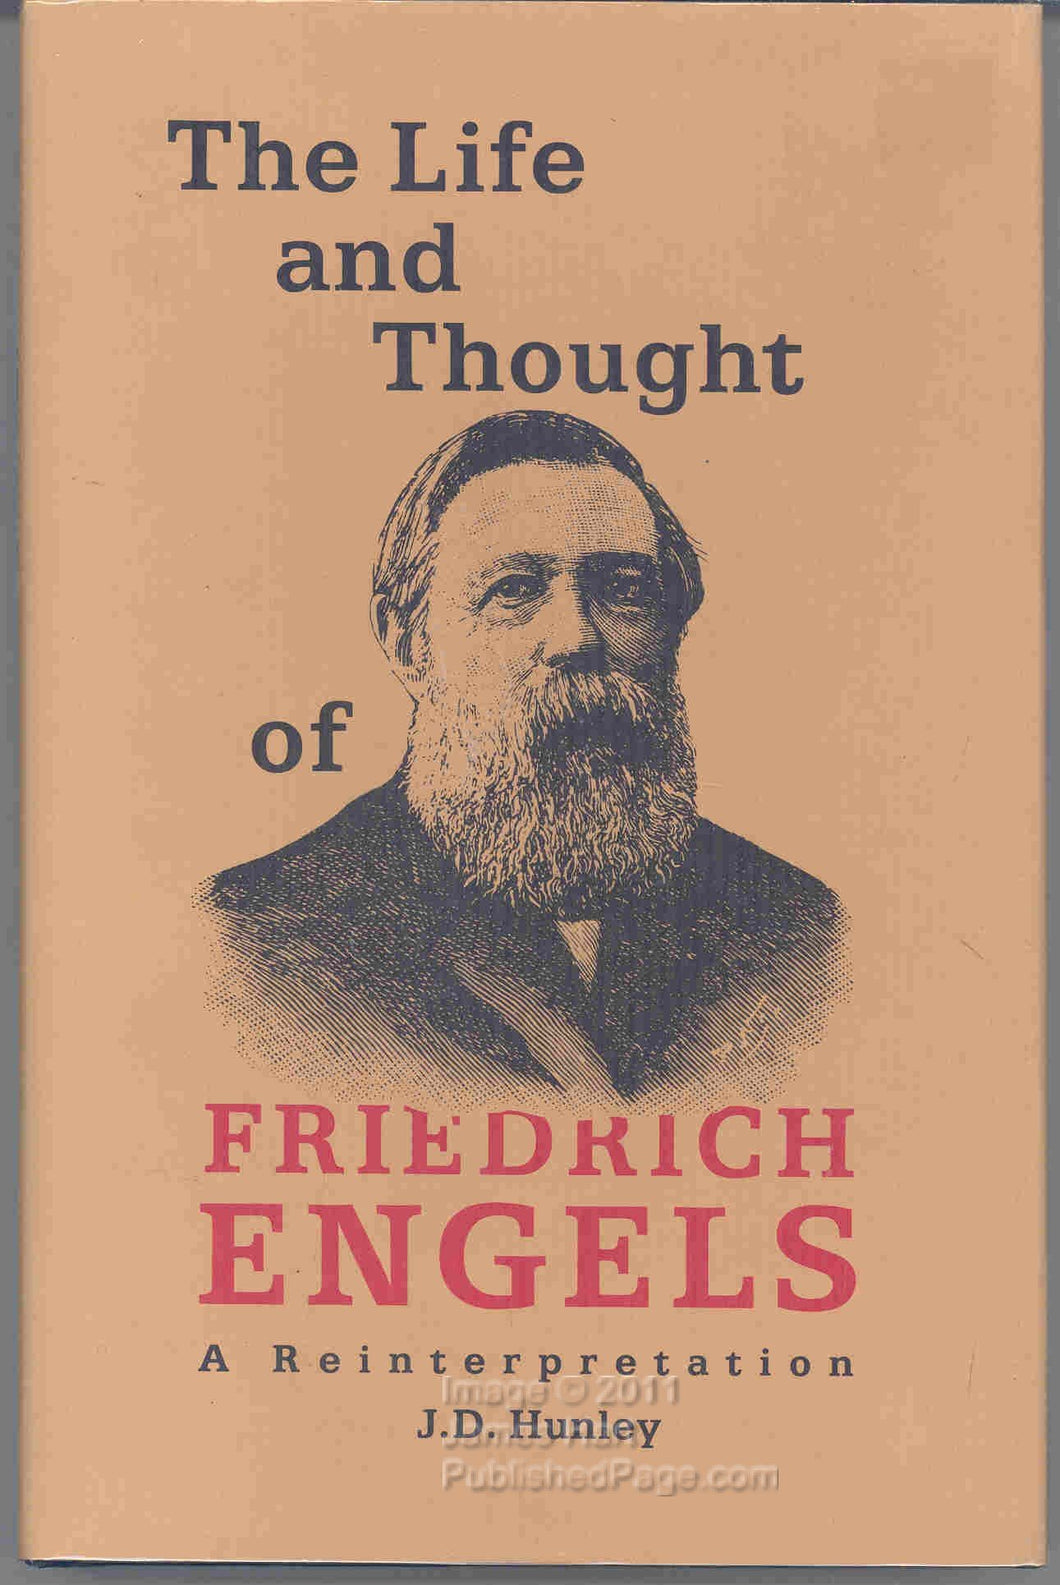 The Life and Thought of Friedrich Engels A Reinterpretation